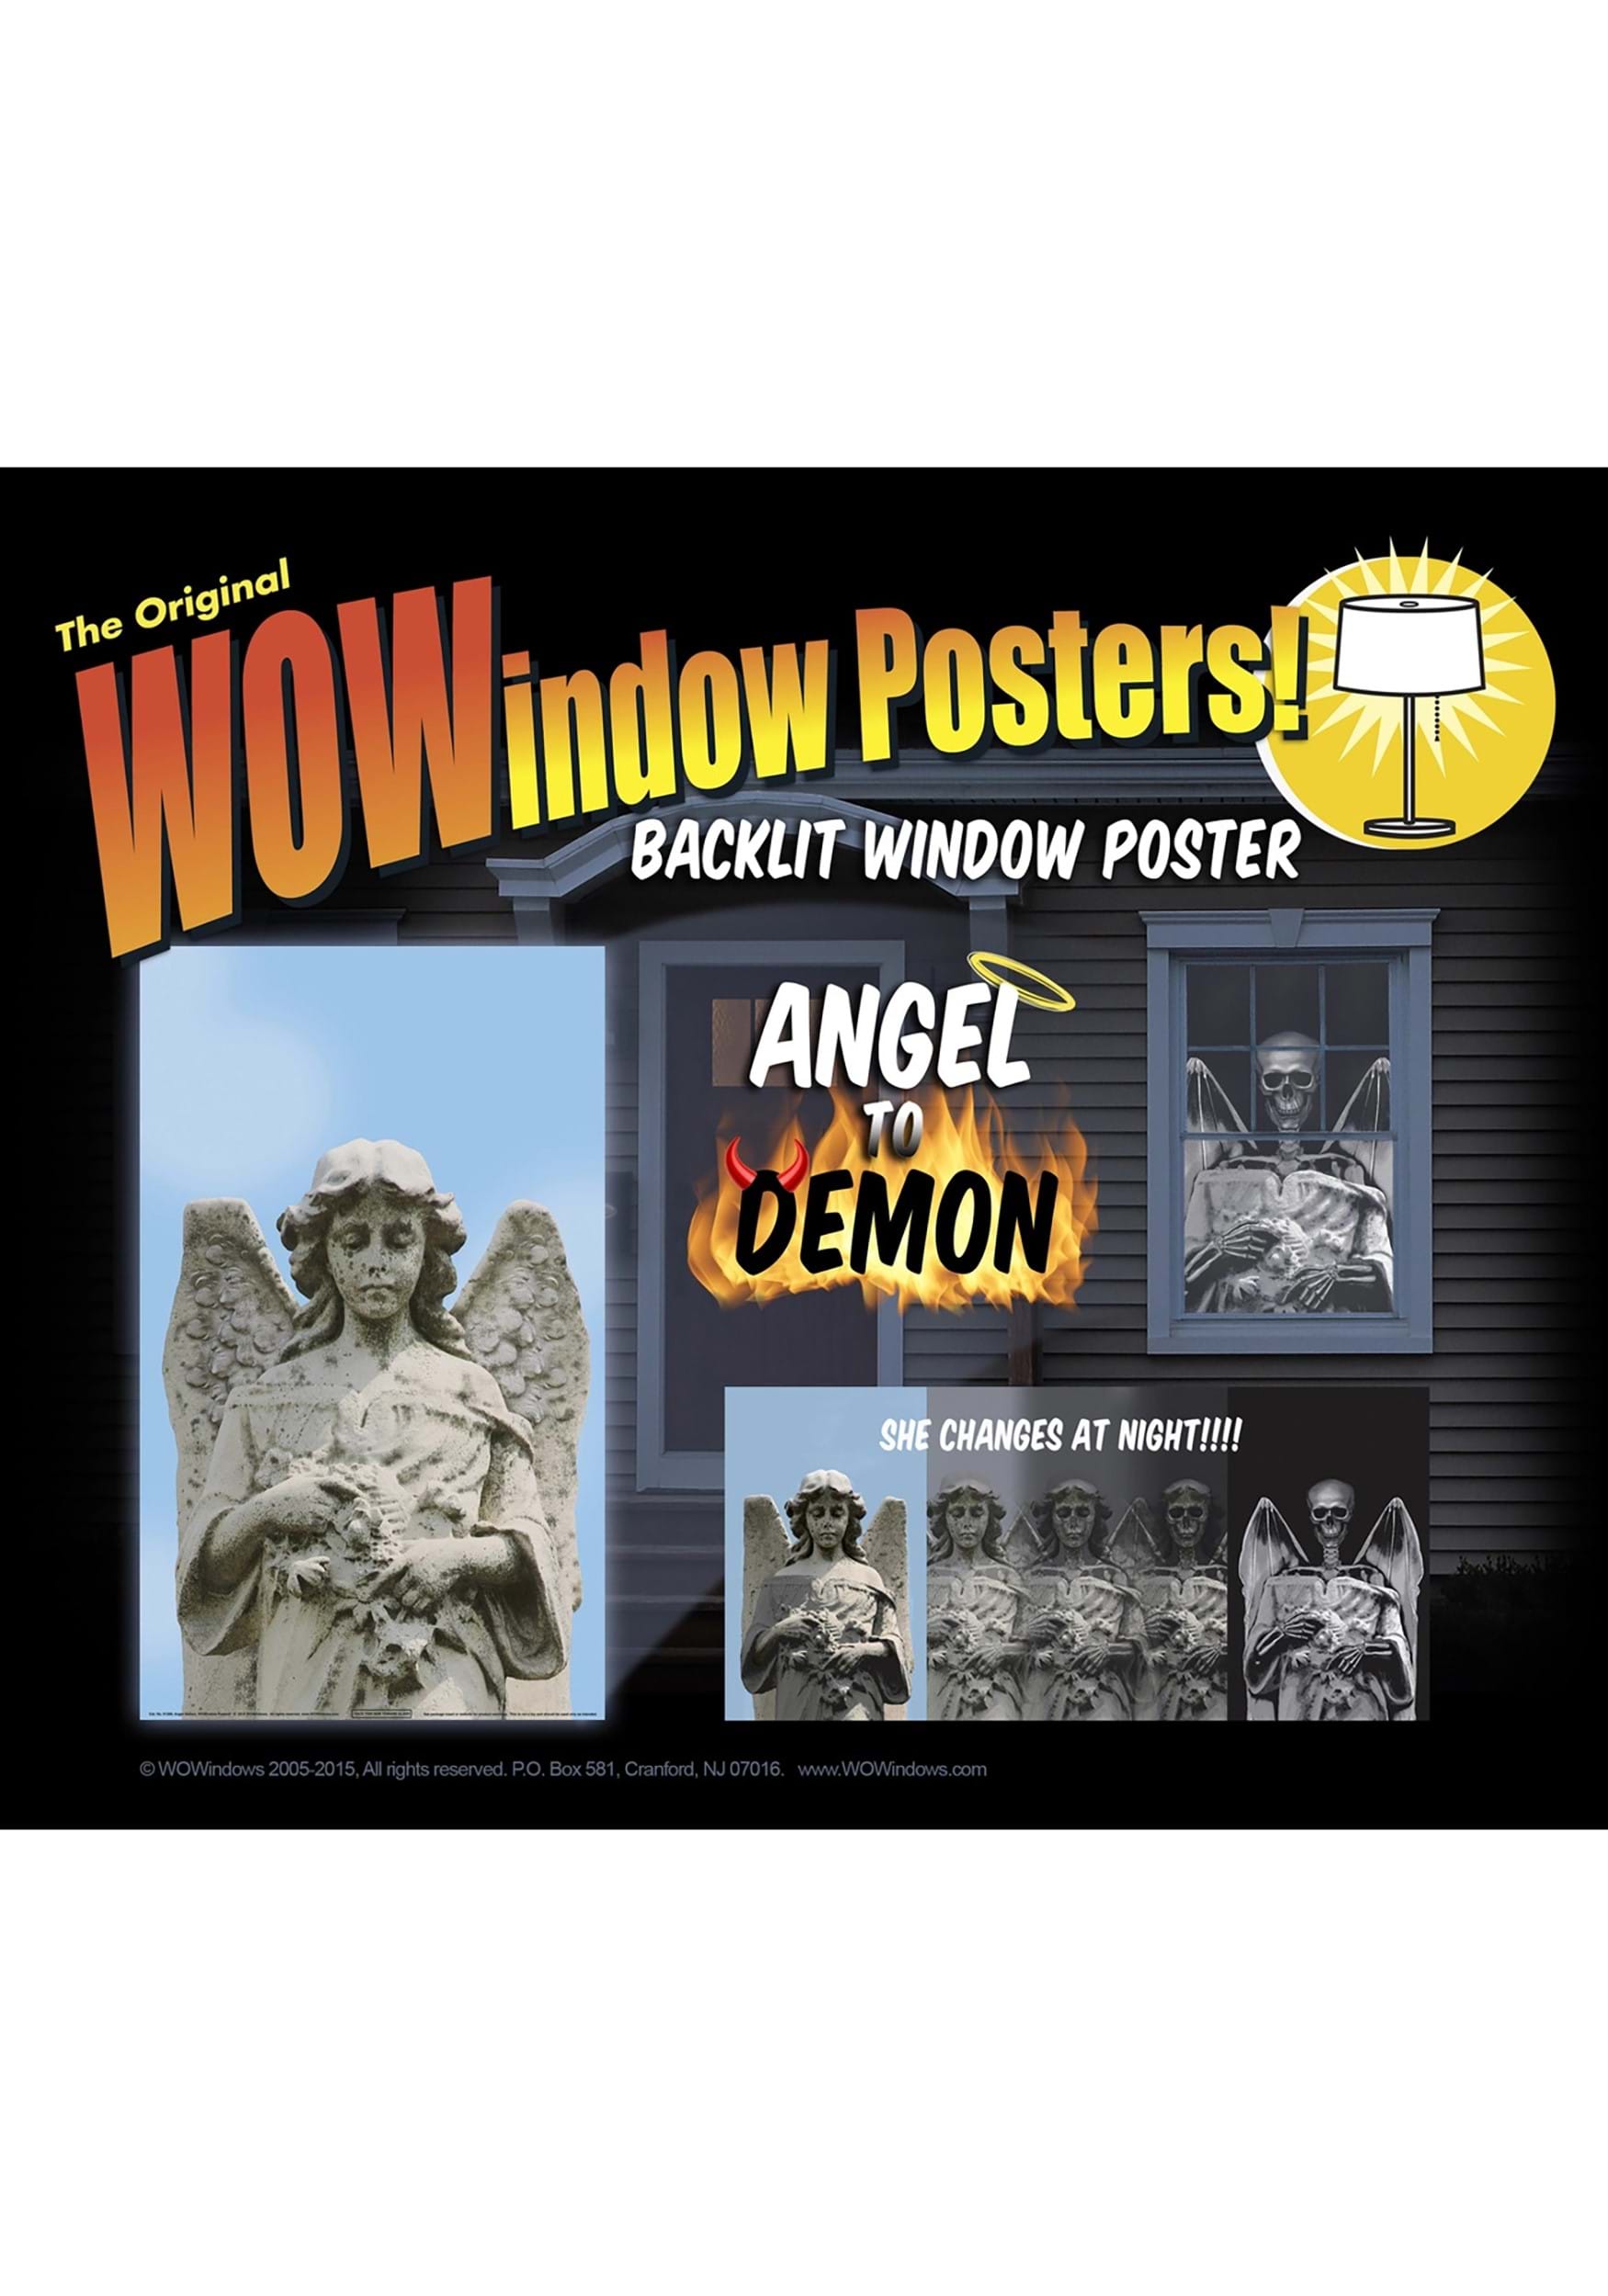 Light Changing Angel To Demon Window Poster